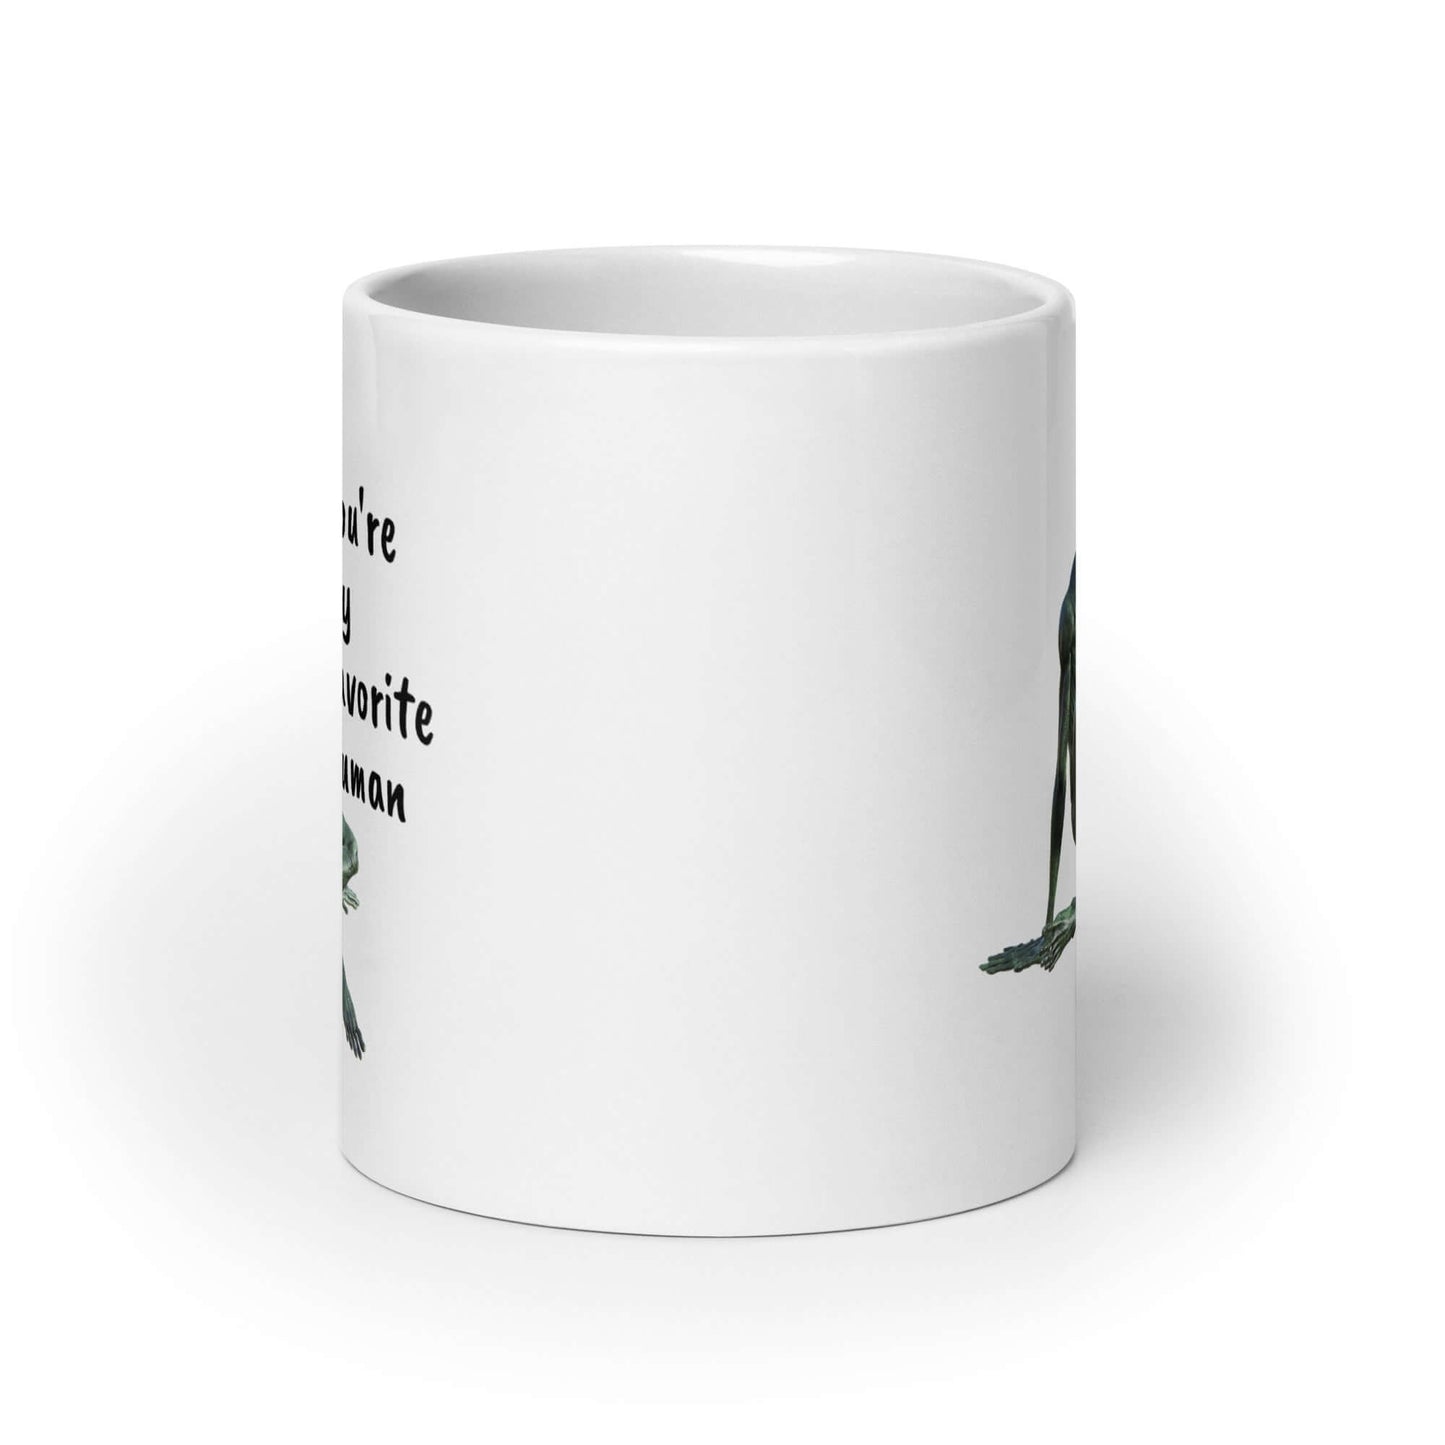 White ceramic coffee mug with funny image of an alien lounging and the words You're my favorite human printed on both sides of the mug.